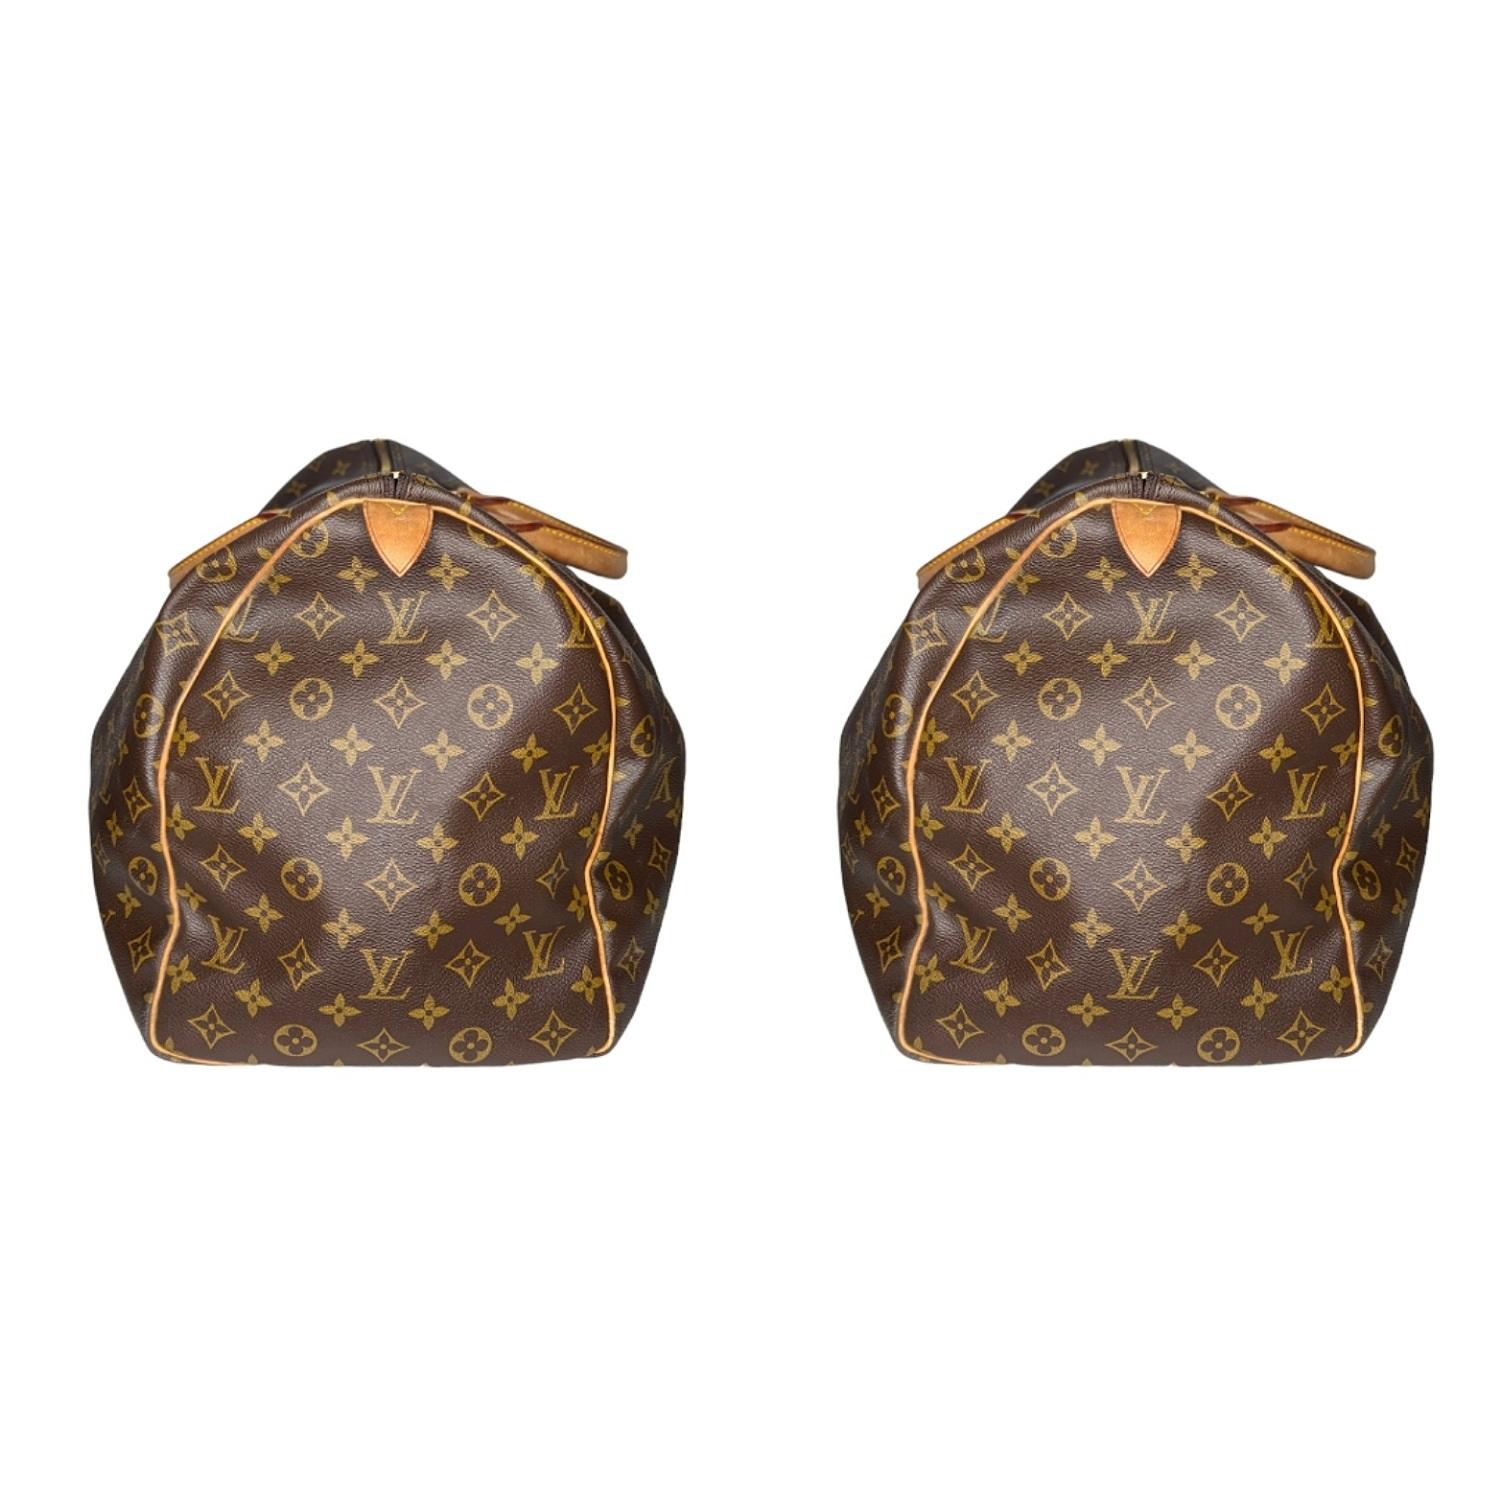 Louis Vuitton 1999 Monogram Canvas Keepall 50 Duffle In Good Condition For Sale In Scottsdale, AZ